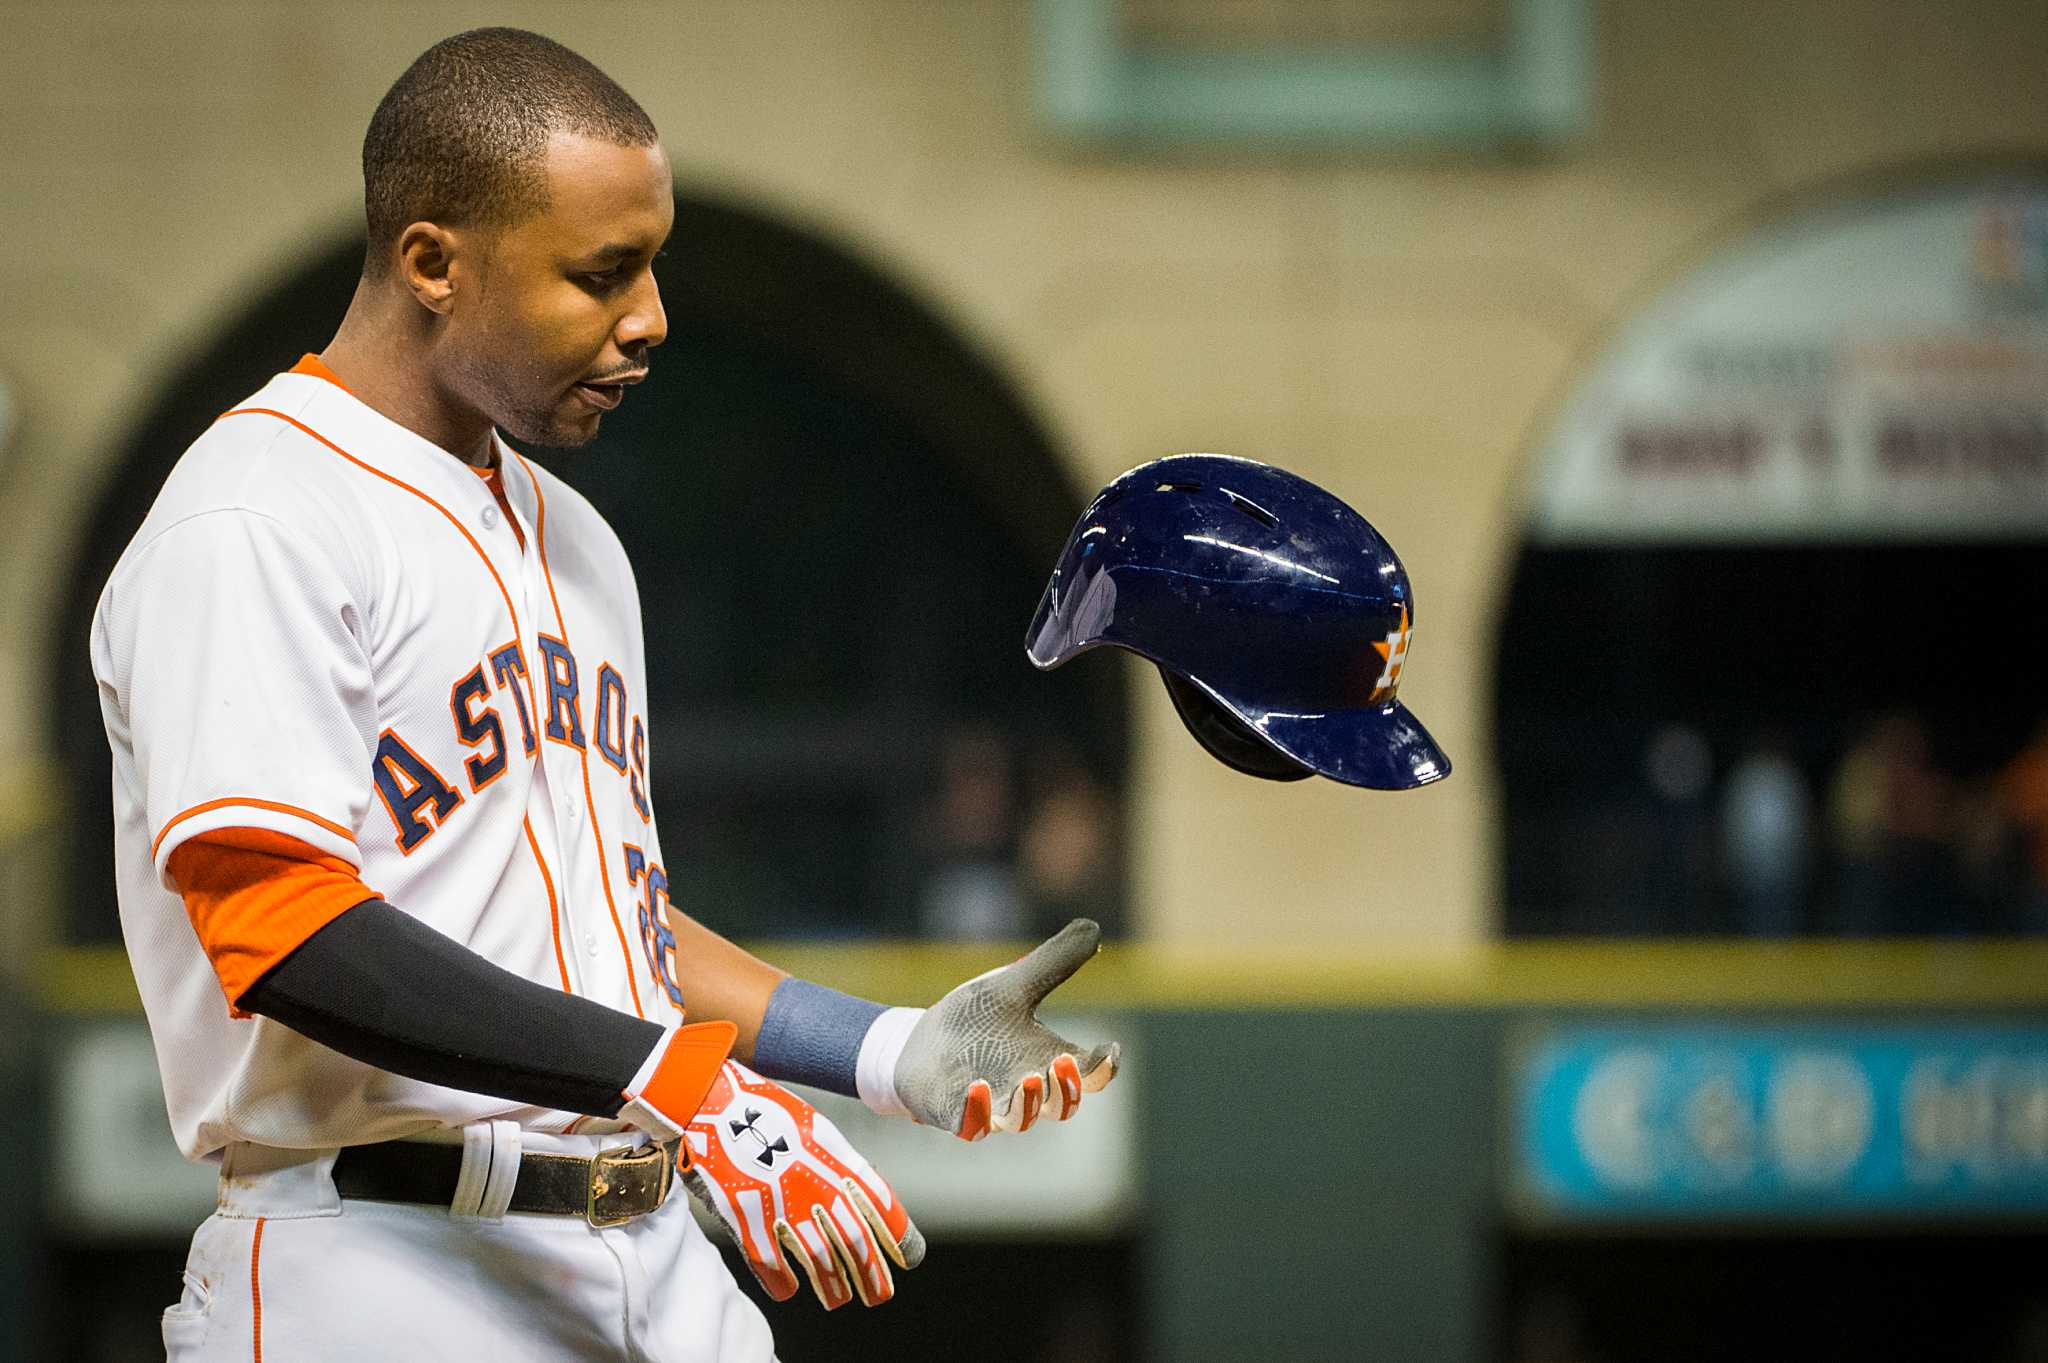 Early deficit too much for Astros' overmatched bats